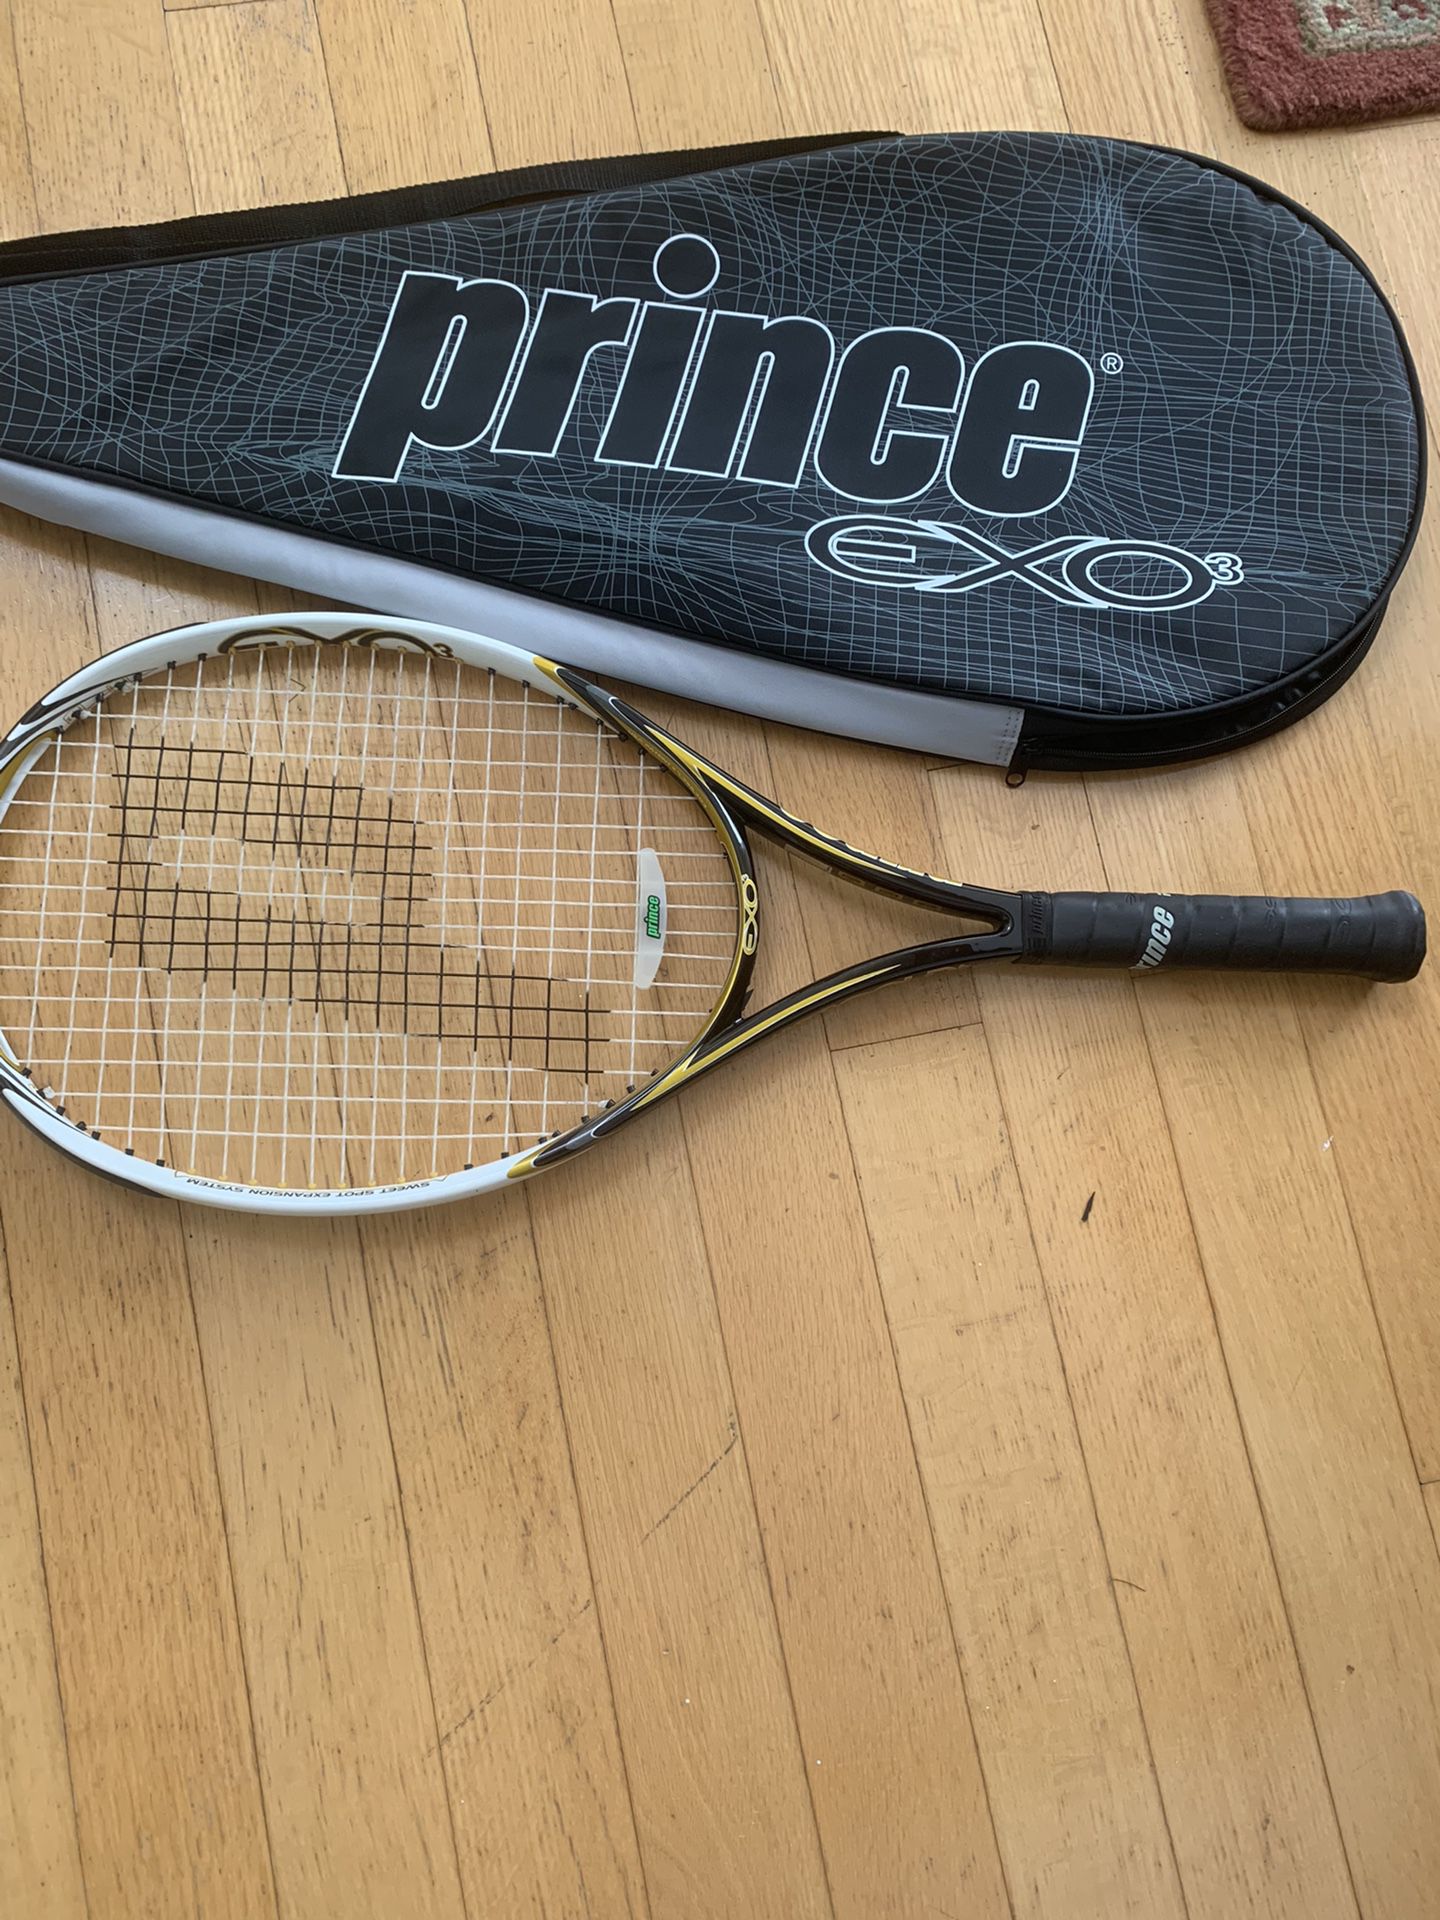 Prince Tennis Racket And Cover